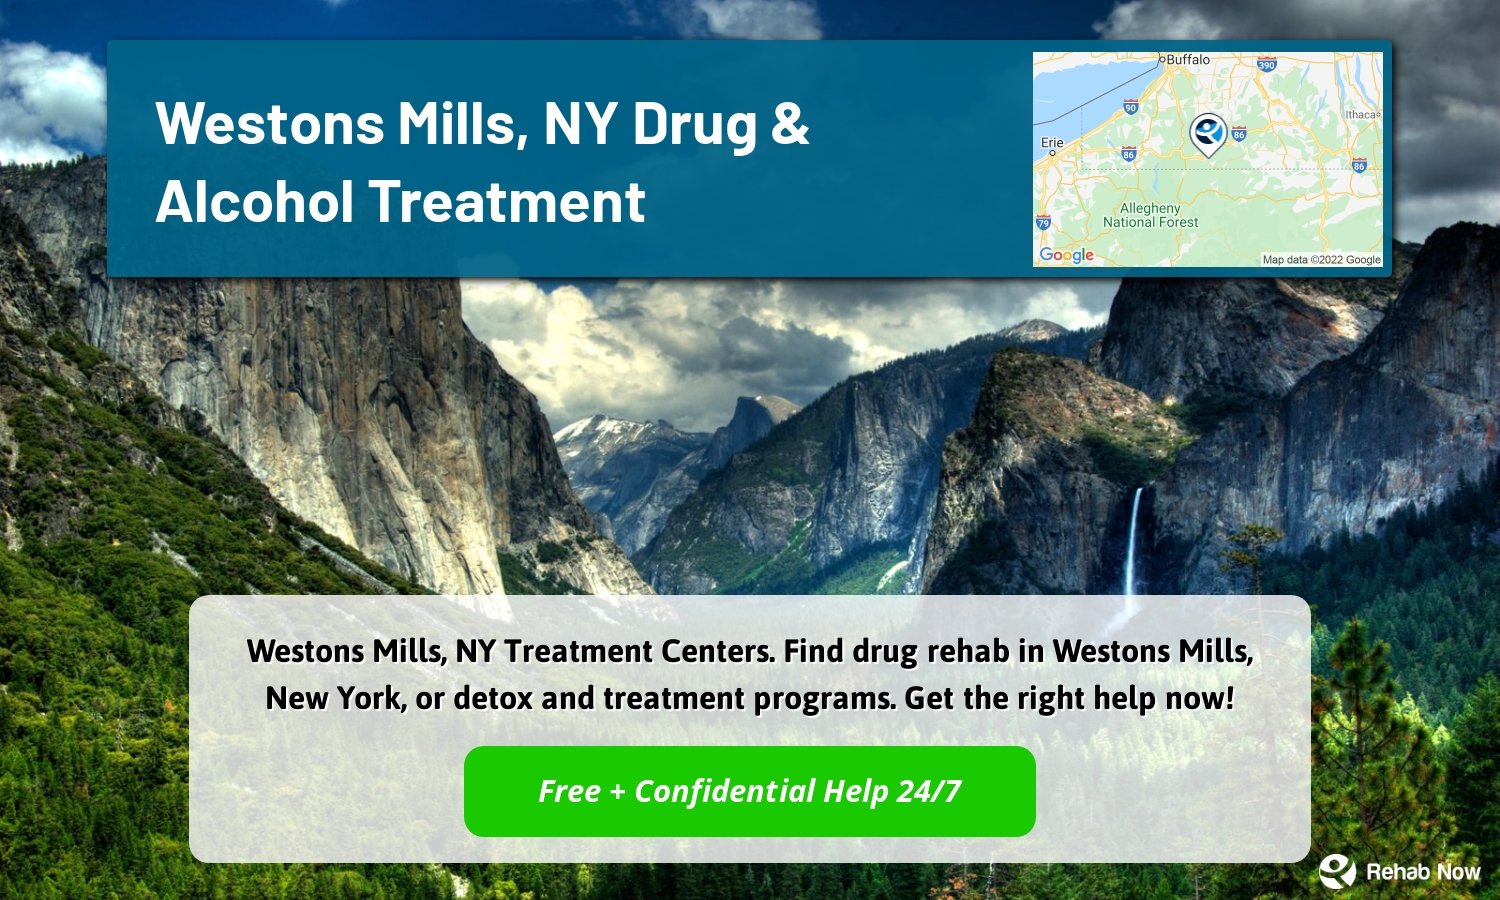 Westons Mills, NY Treatment Centers. Find drug rehab in Westons Mills, New York, or detox and treatment programs. Get the right help now!